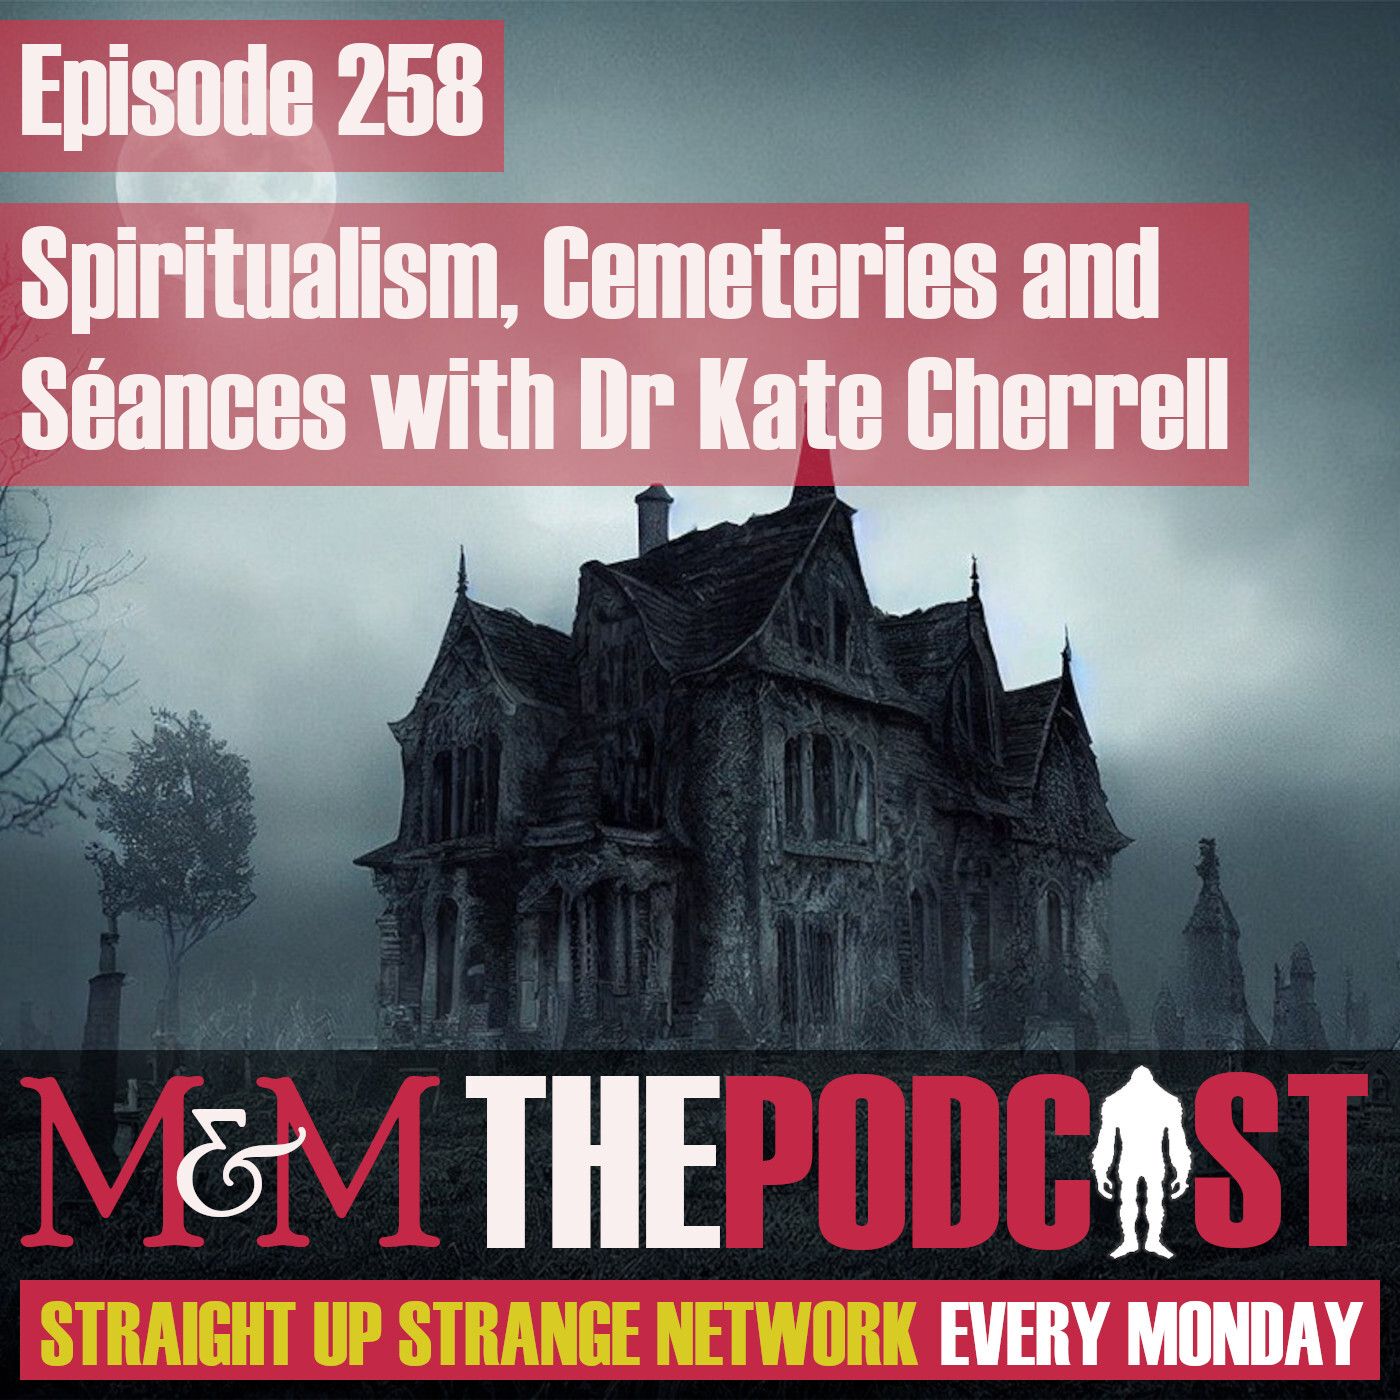 Mysteries and Monsters: Episode 258 Spritualism, Cemeteries and Seances with Dr Kate Cherrell